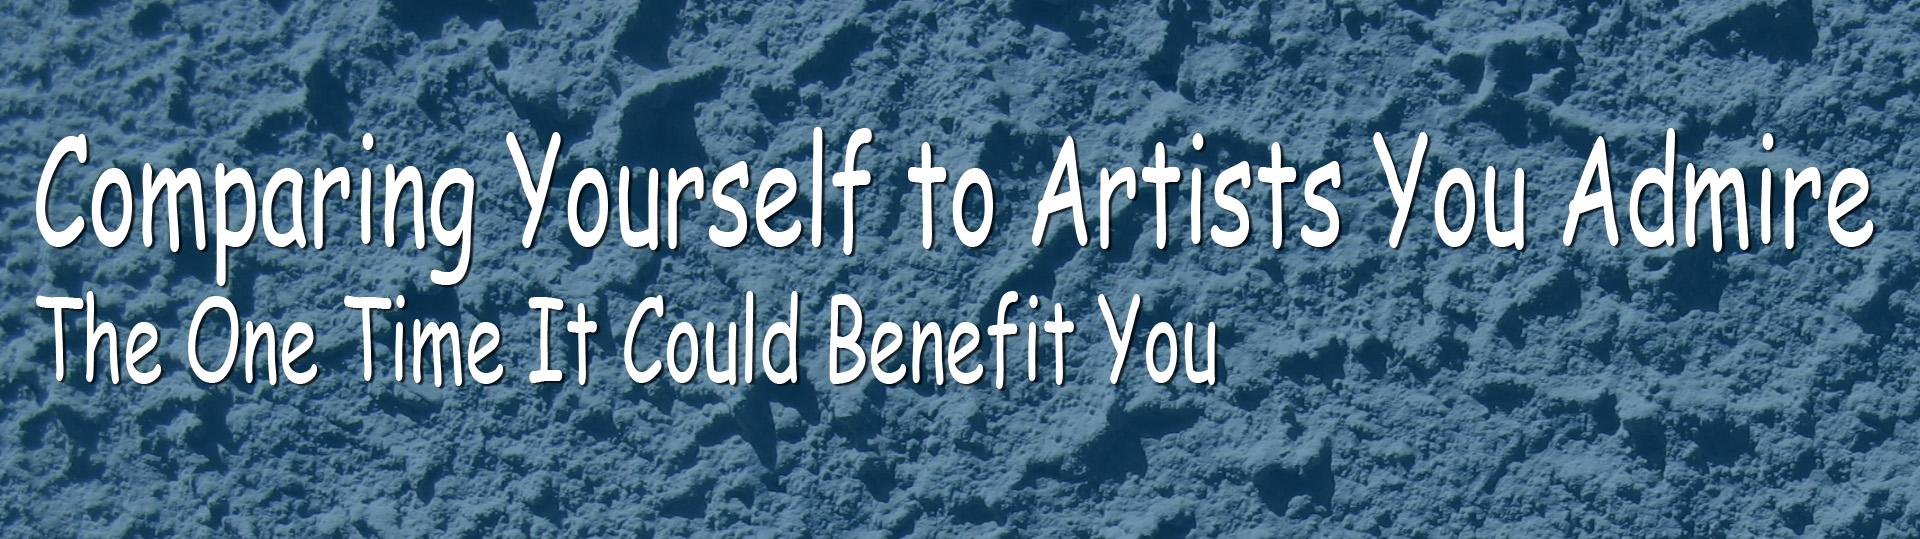 Comparing Yourself to Artists You Admire